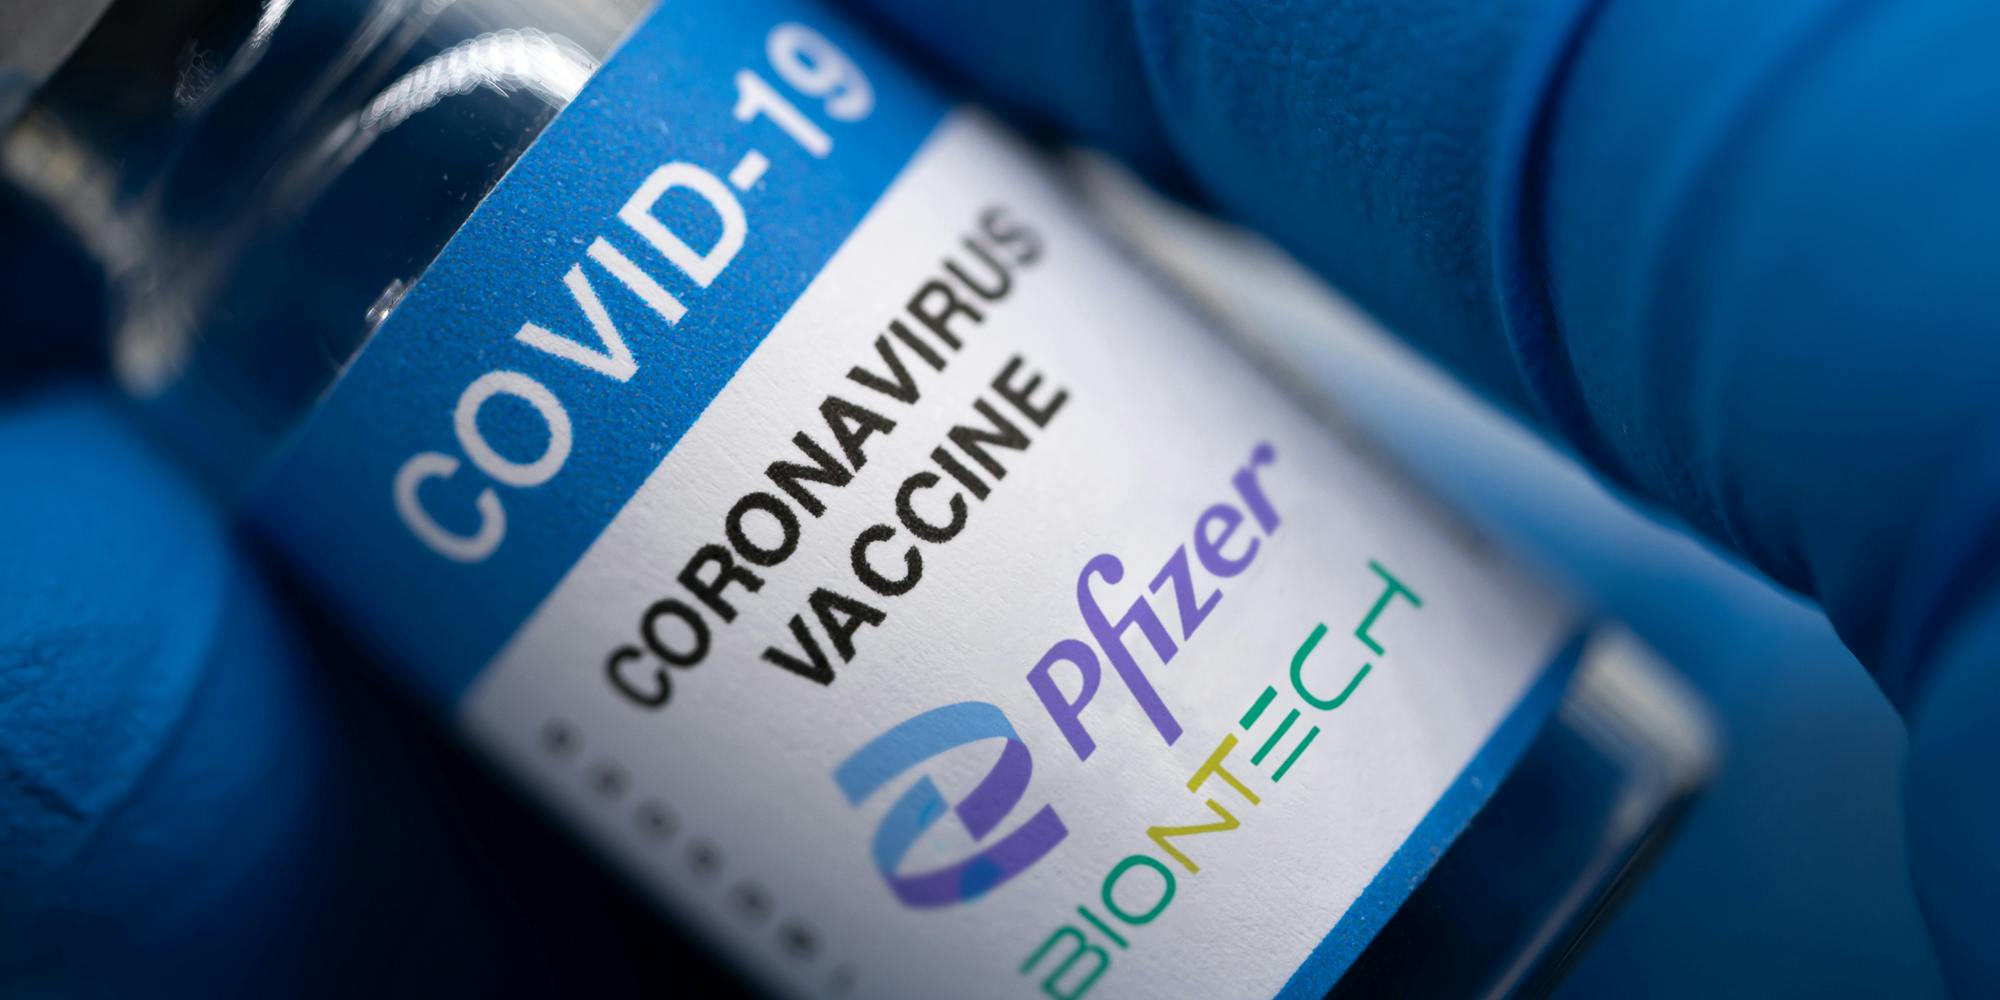 Covid-19 vaccine with Pfizer logo. Doctor's hand holds a bottle with a coronavirus vaccine on a white background.